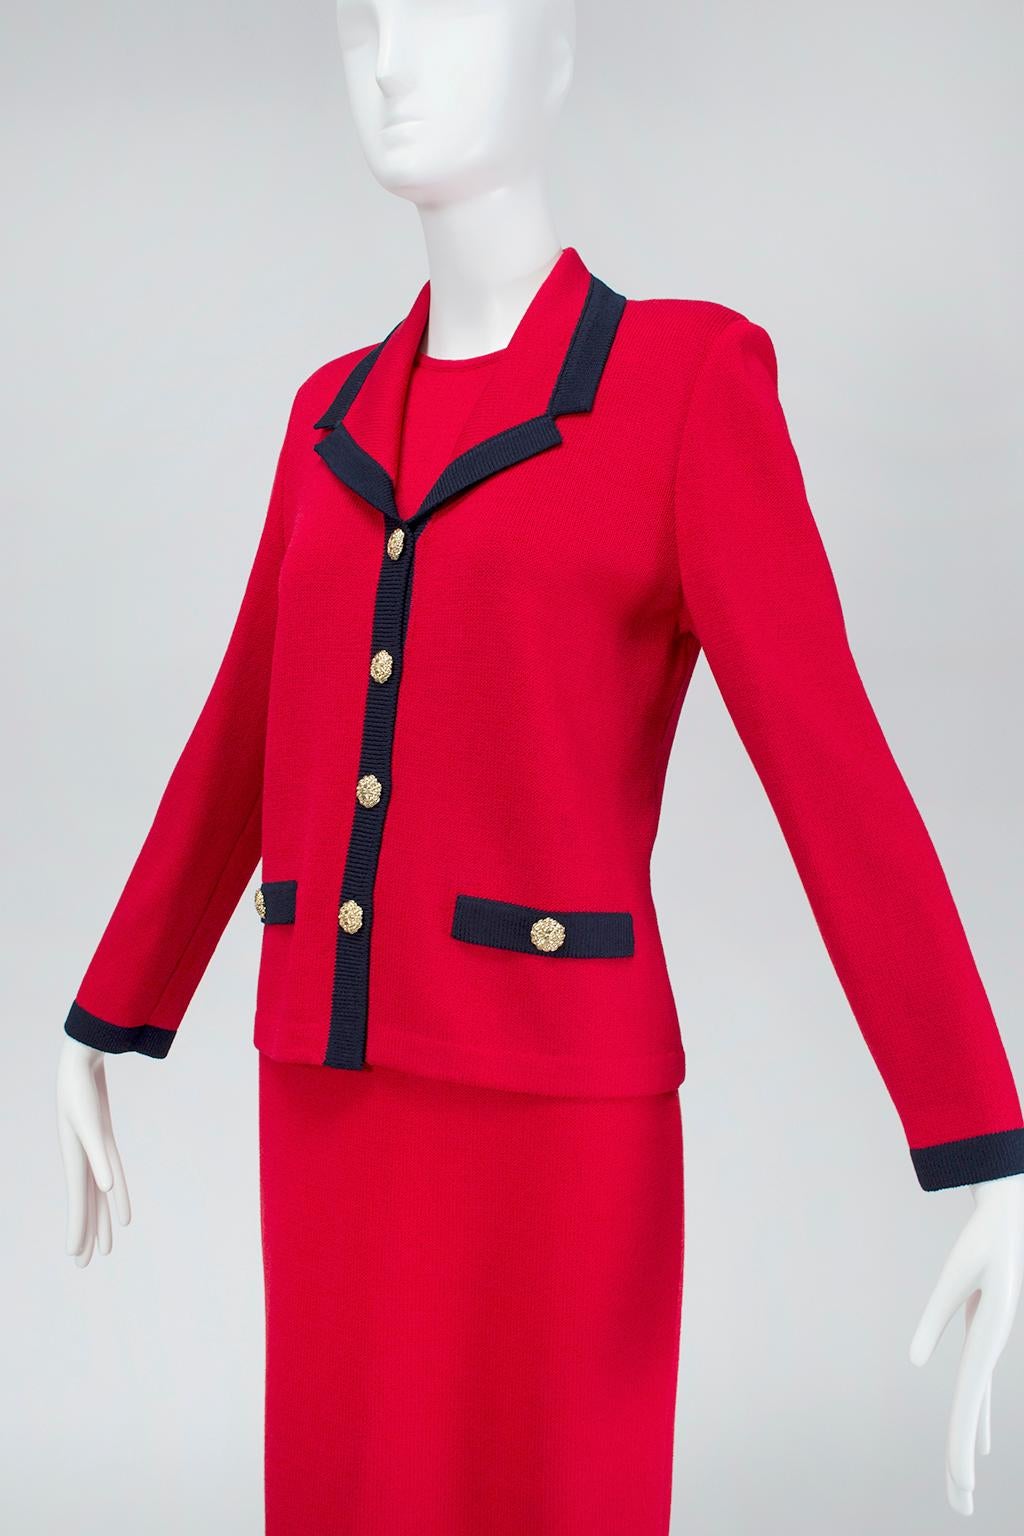 Women's St John Collection Nautical Red Cardigan Dress Suit with Gold Accents – M, 1990s